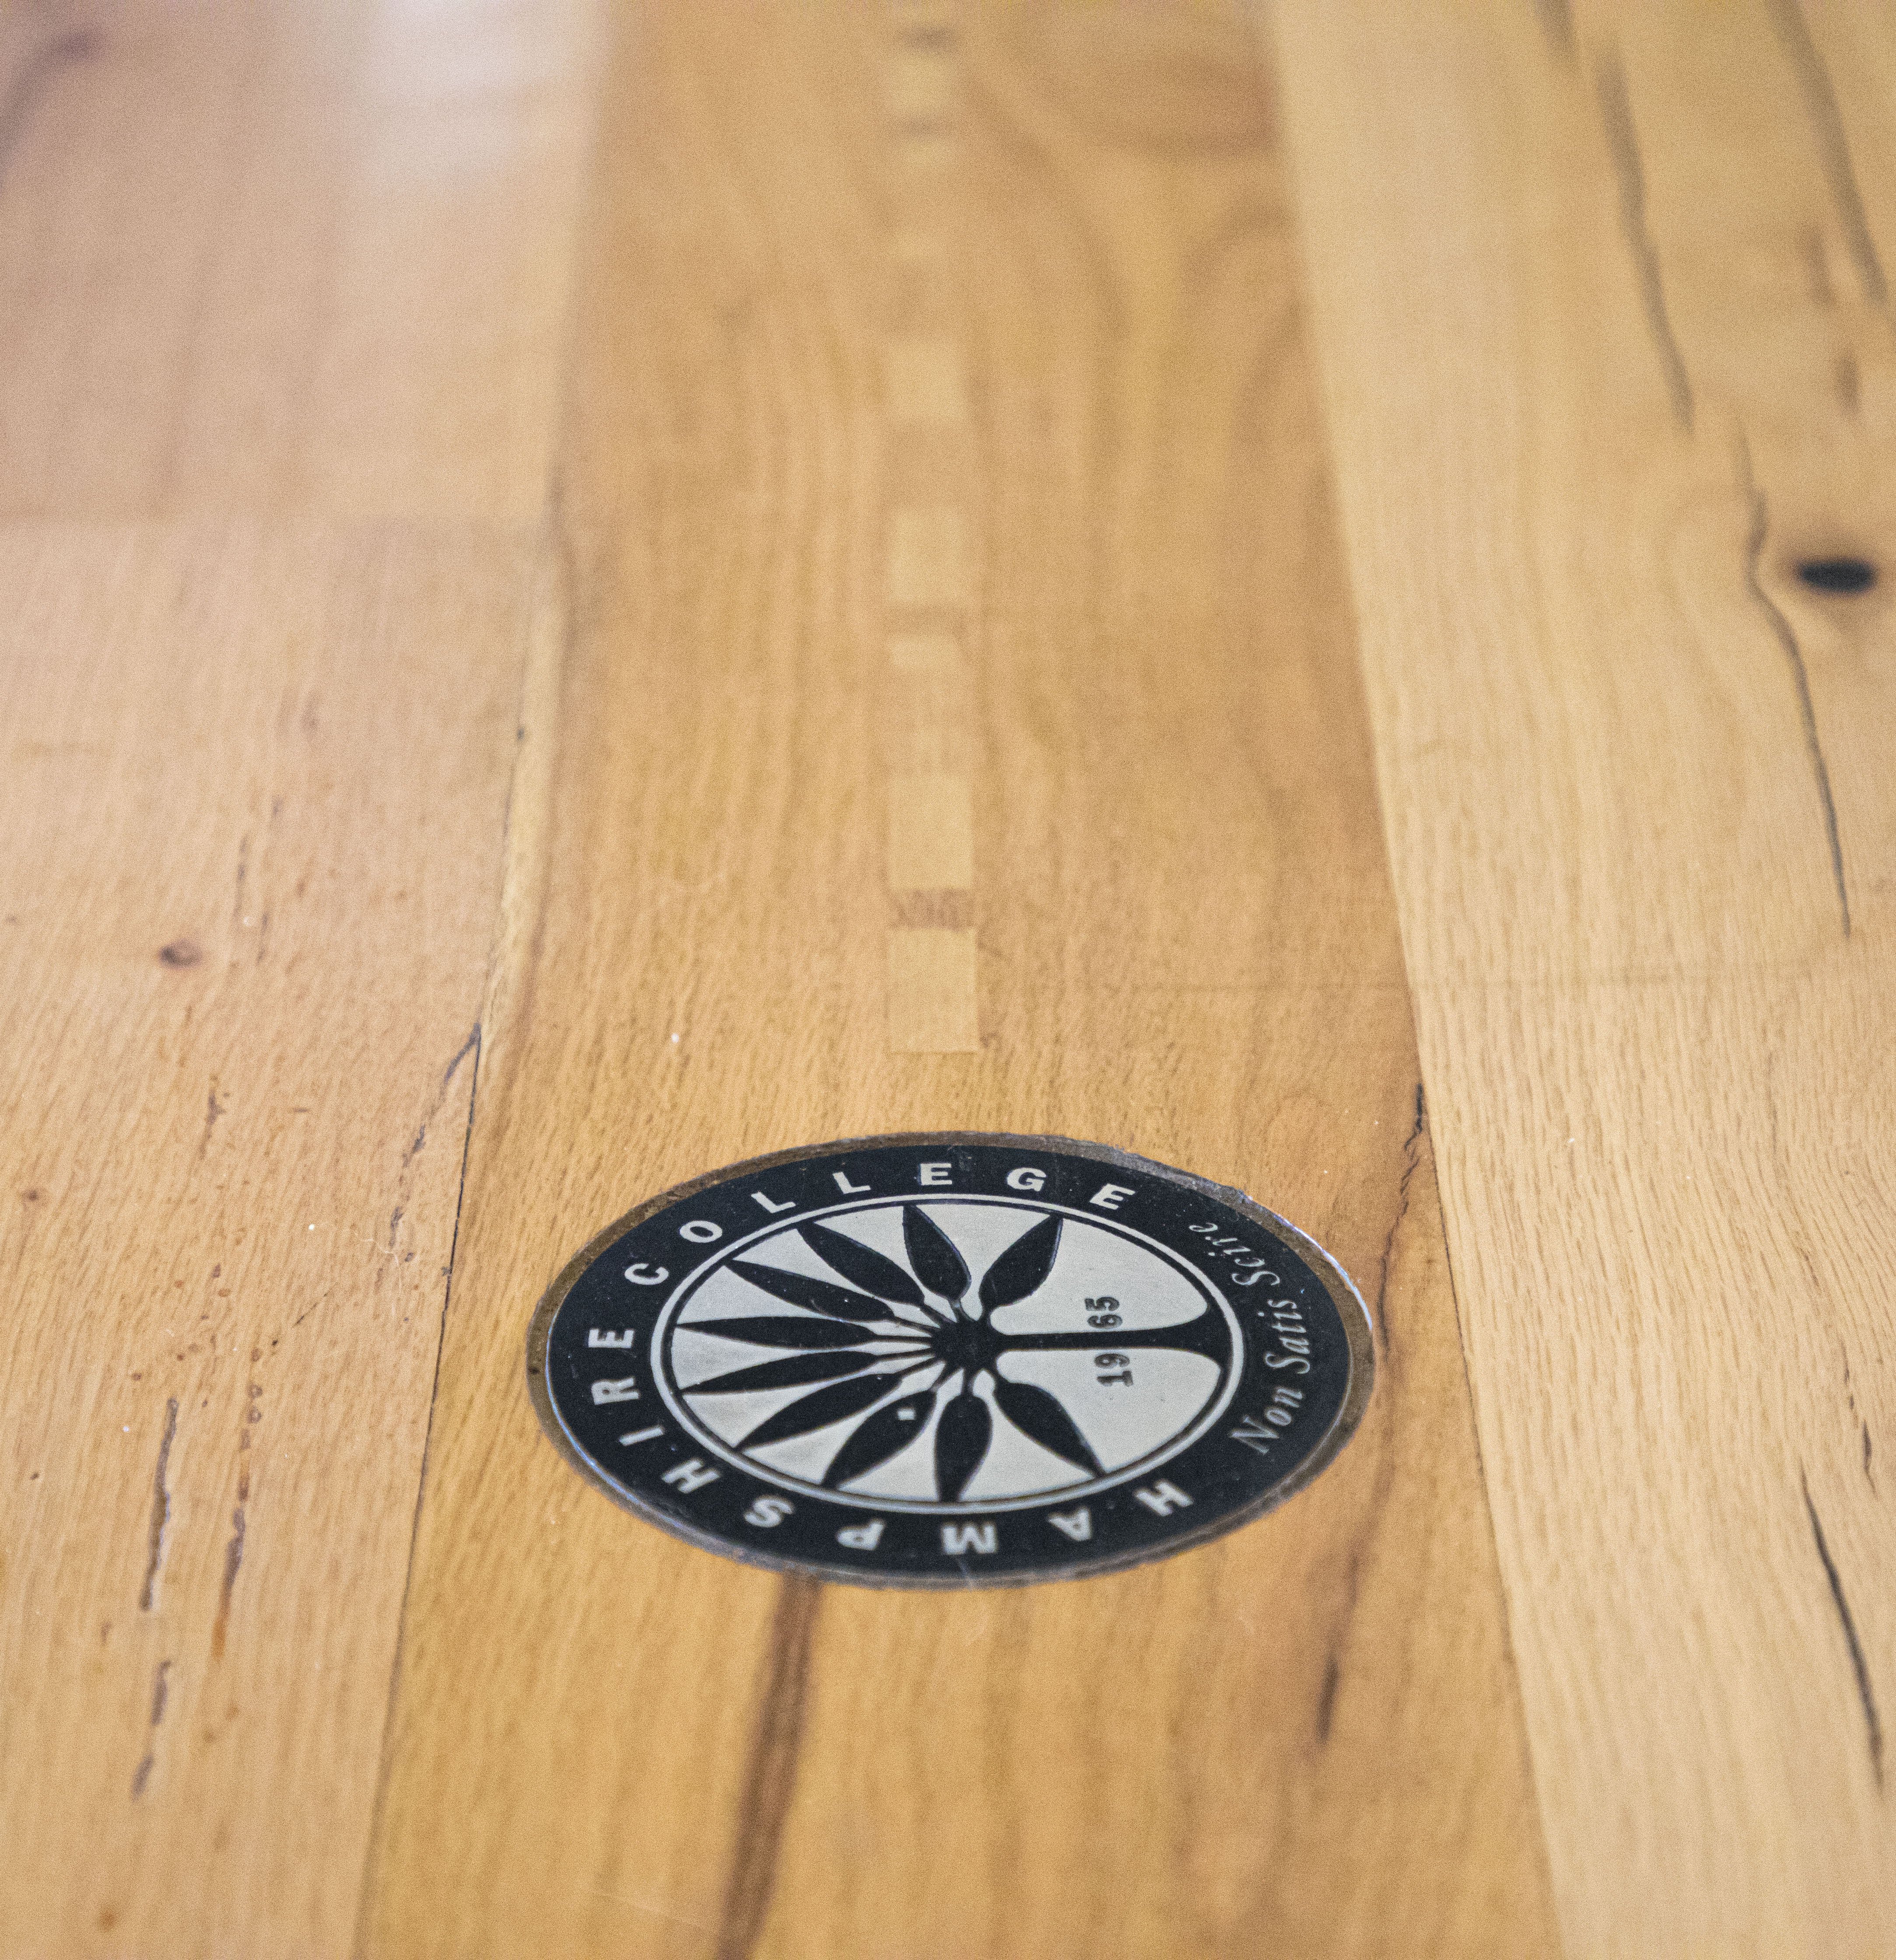 The wood floor in the R.W. Kern Center, with the black and white Hampshire College logo sticker on the floor.